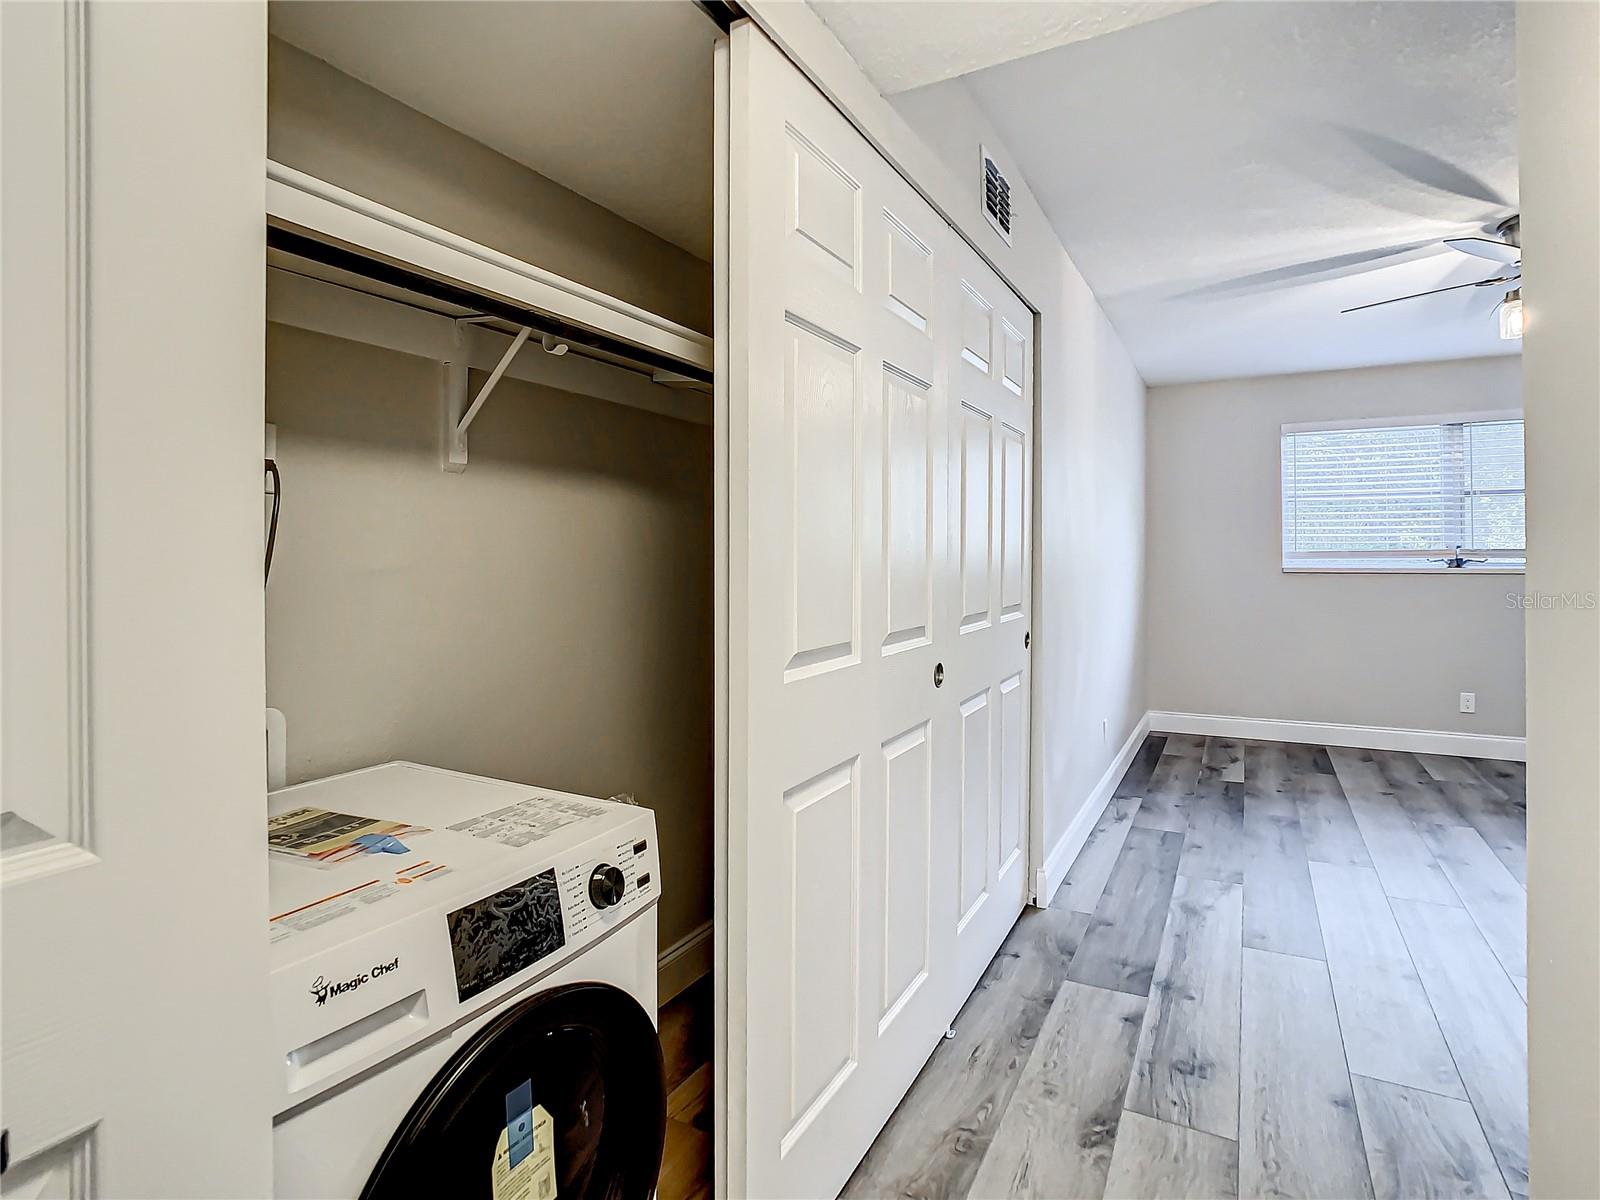 All-In-One Washer/Dryer machine in large primary bedroom closet